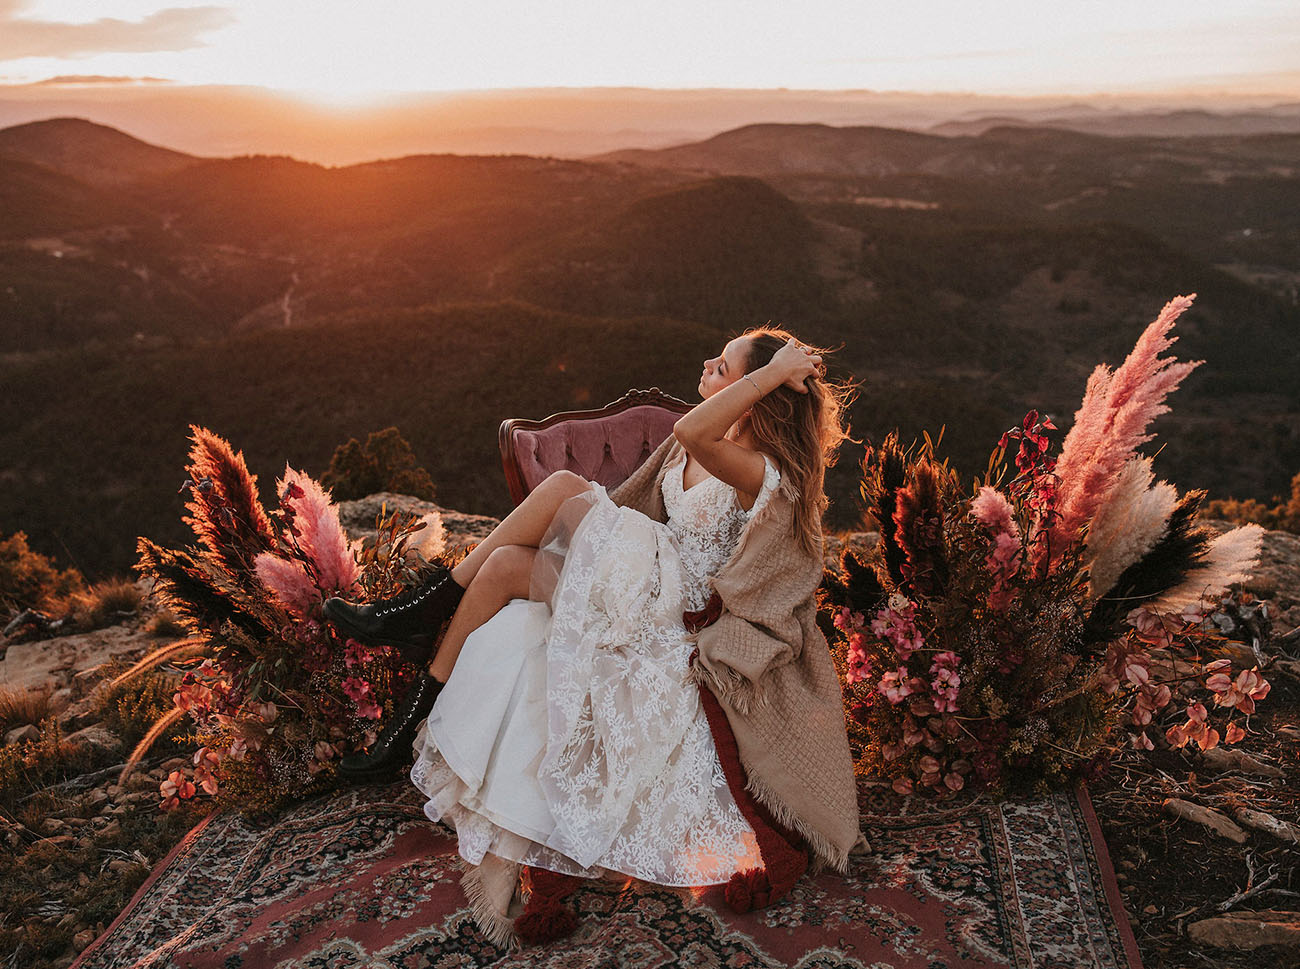 A nature lover’s dream elopement in the Spanish mountains